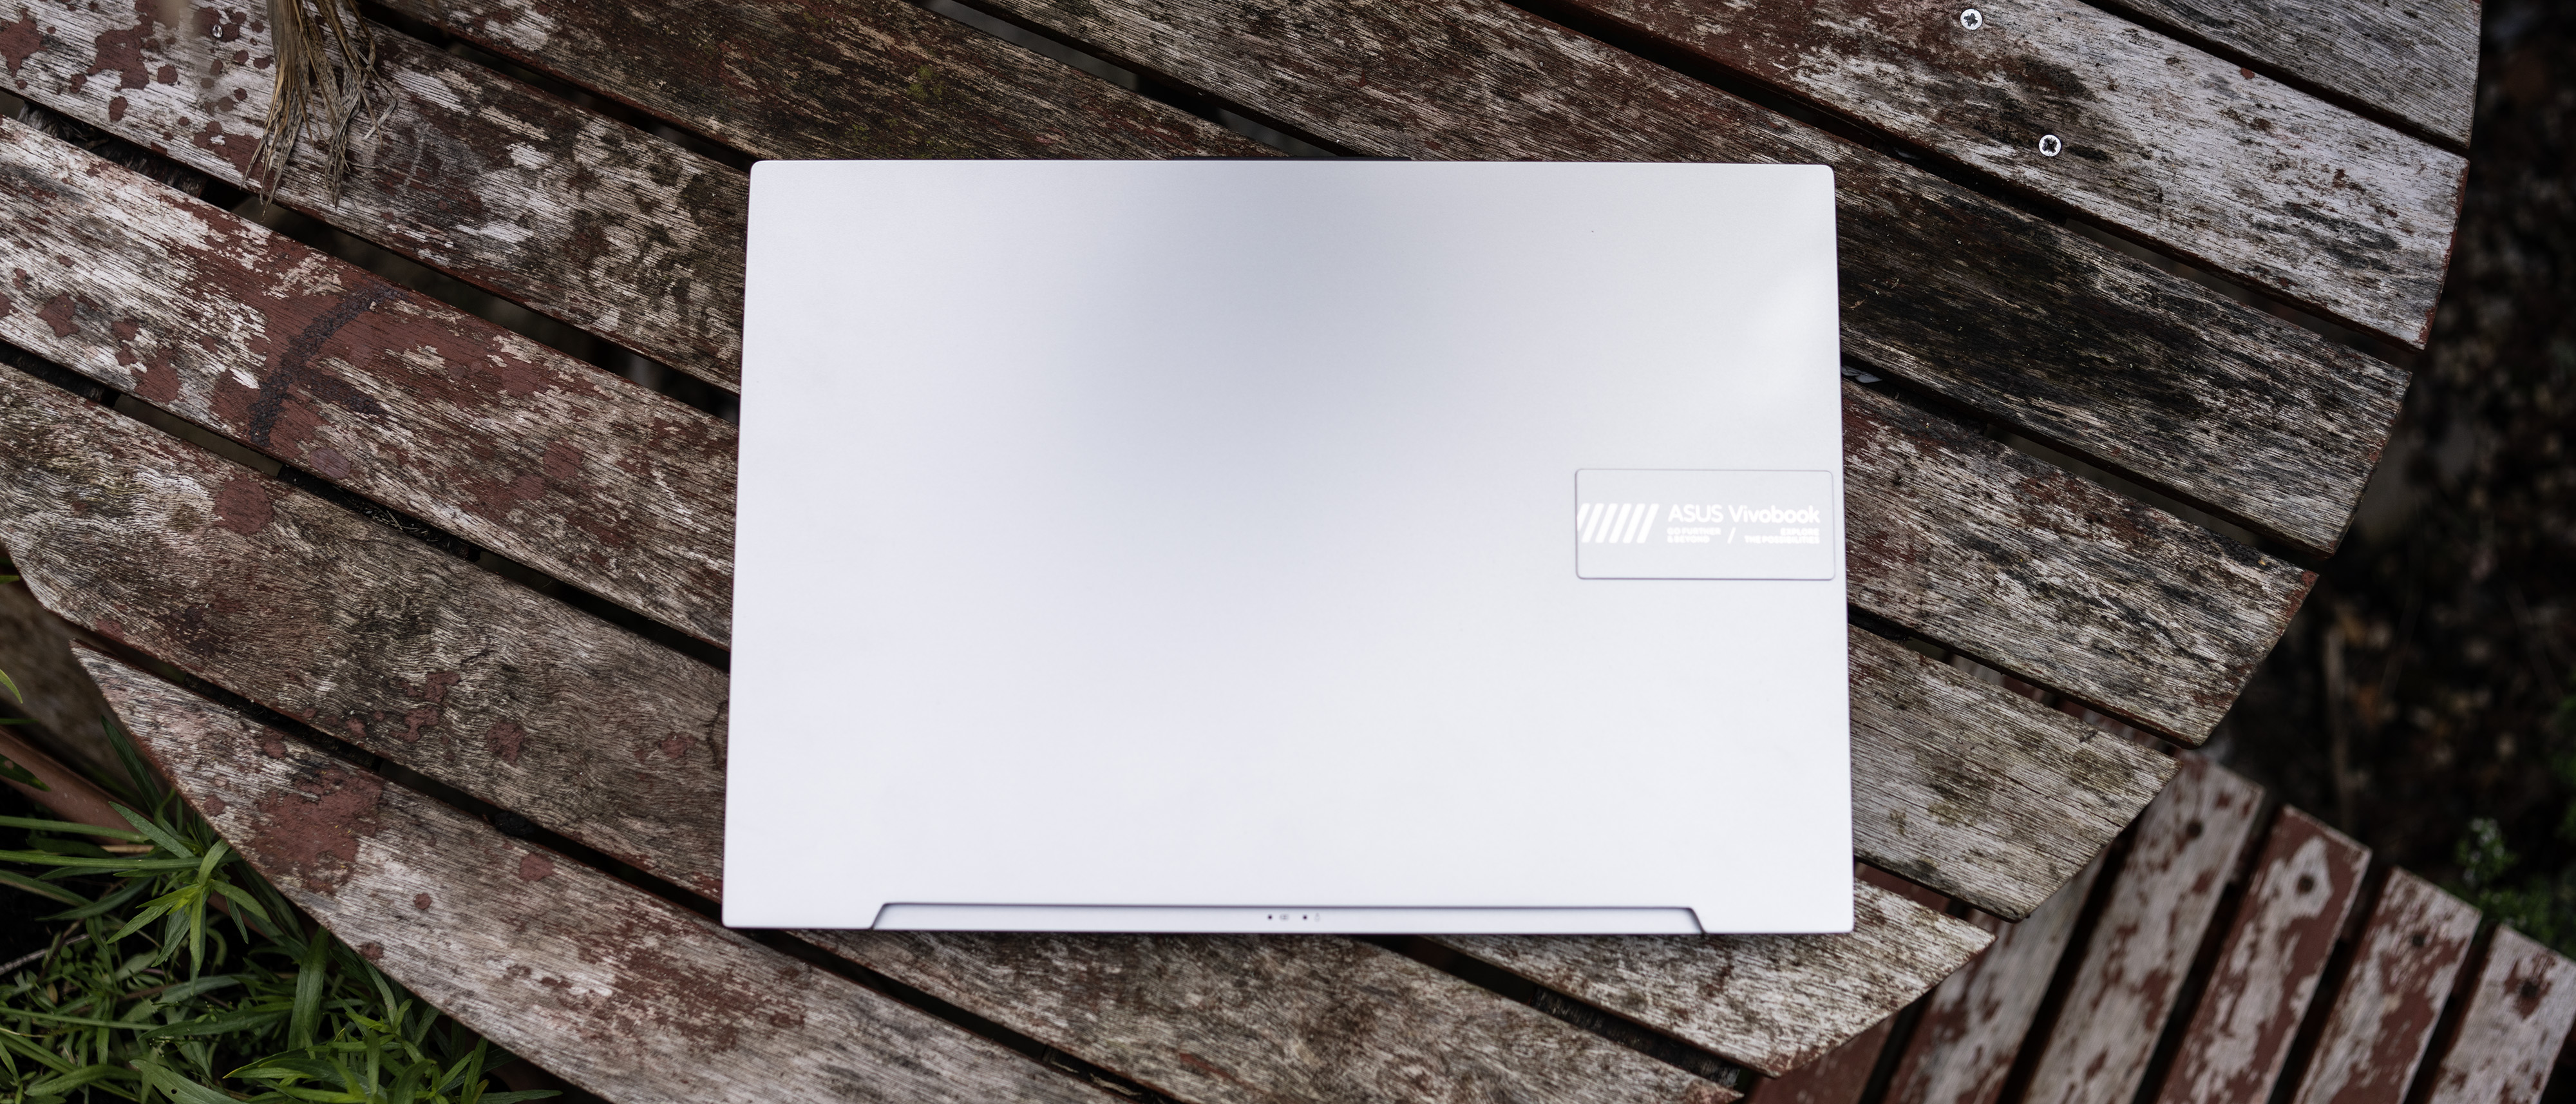 Hands On With The Asus Vivobook 16X OLED F1603 — Sypnotix